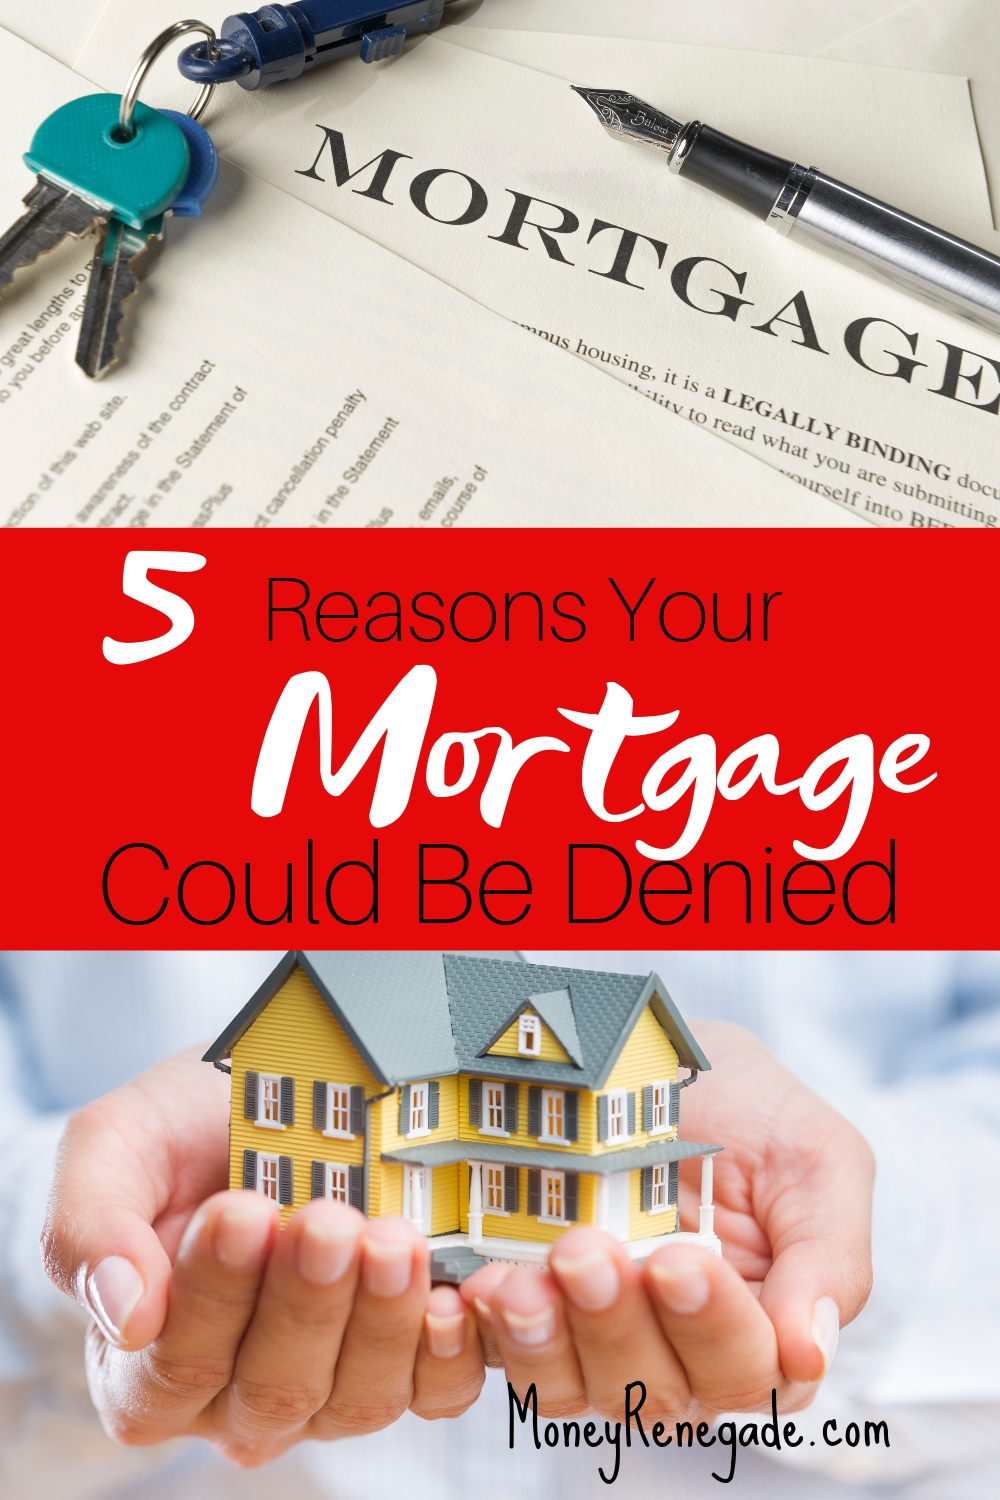 5 Reasons your mortgage could be denied